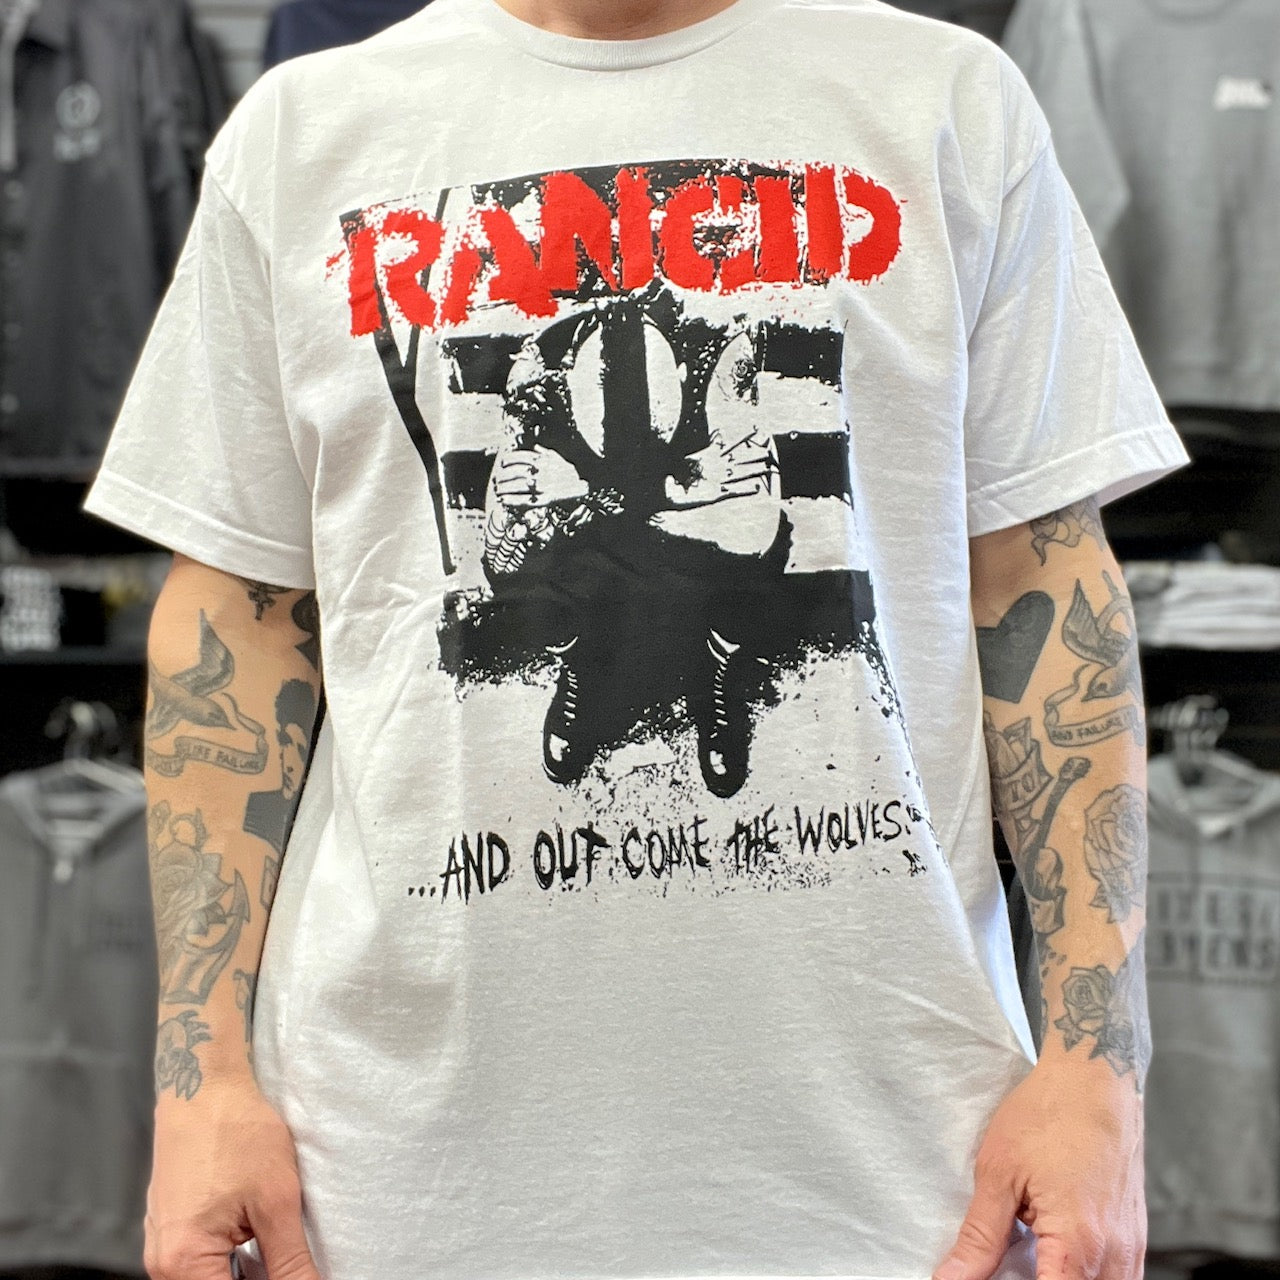 Rancid T-Shirt - Out Come The Wolves